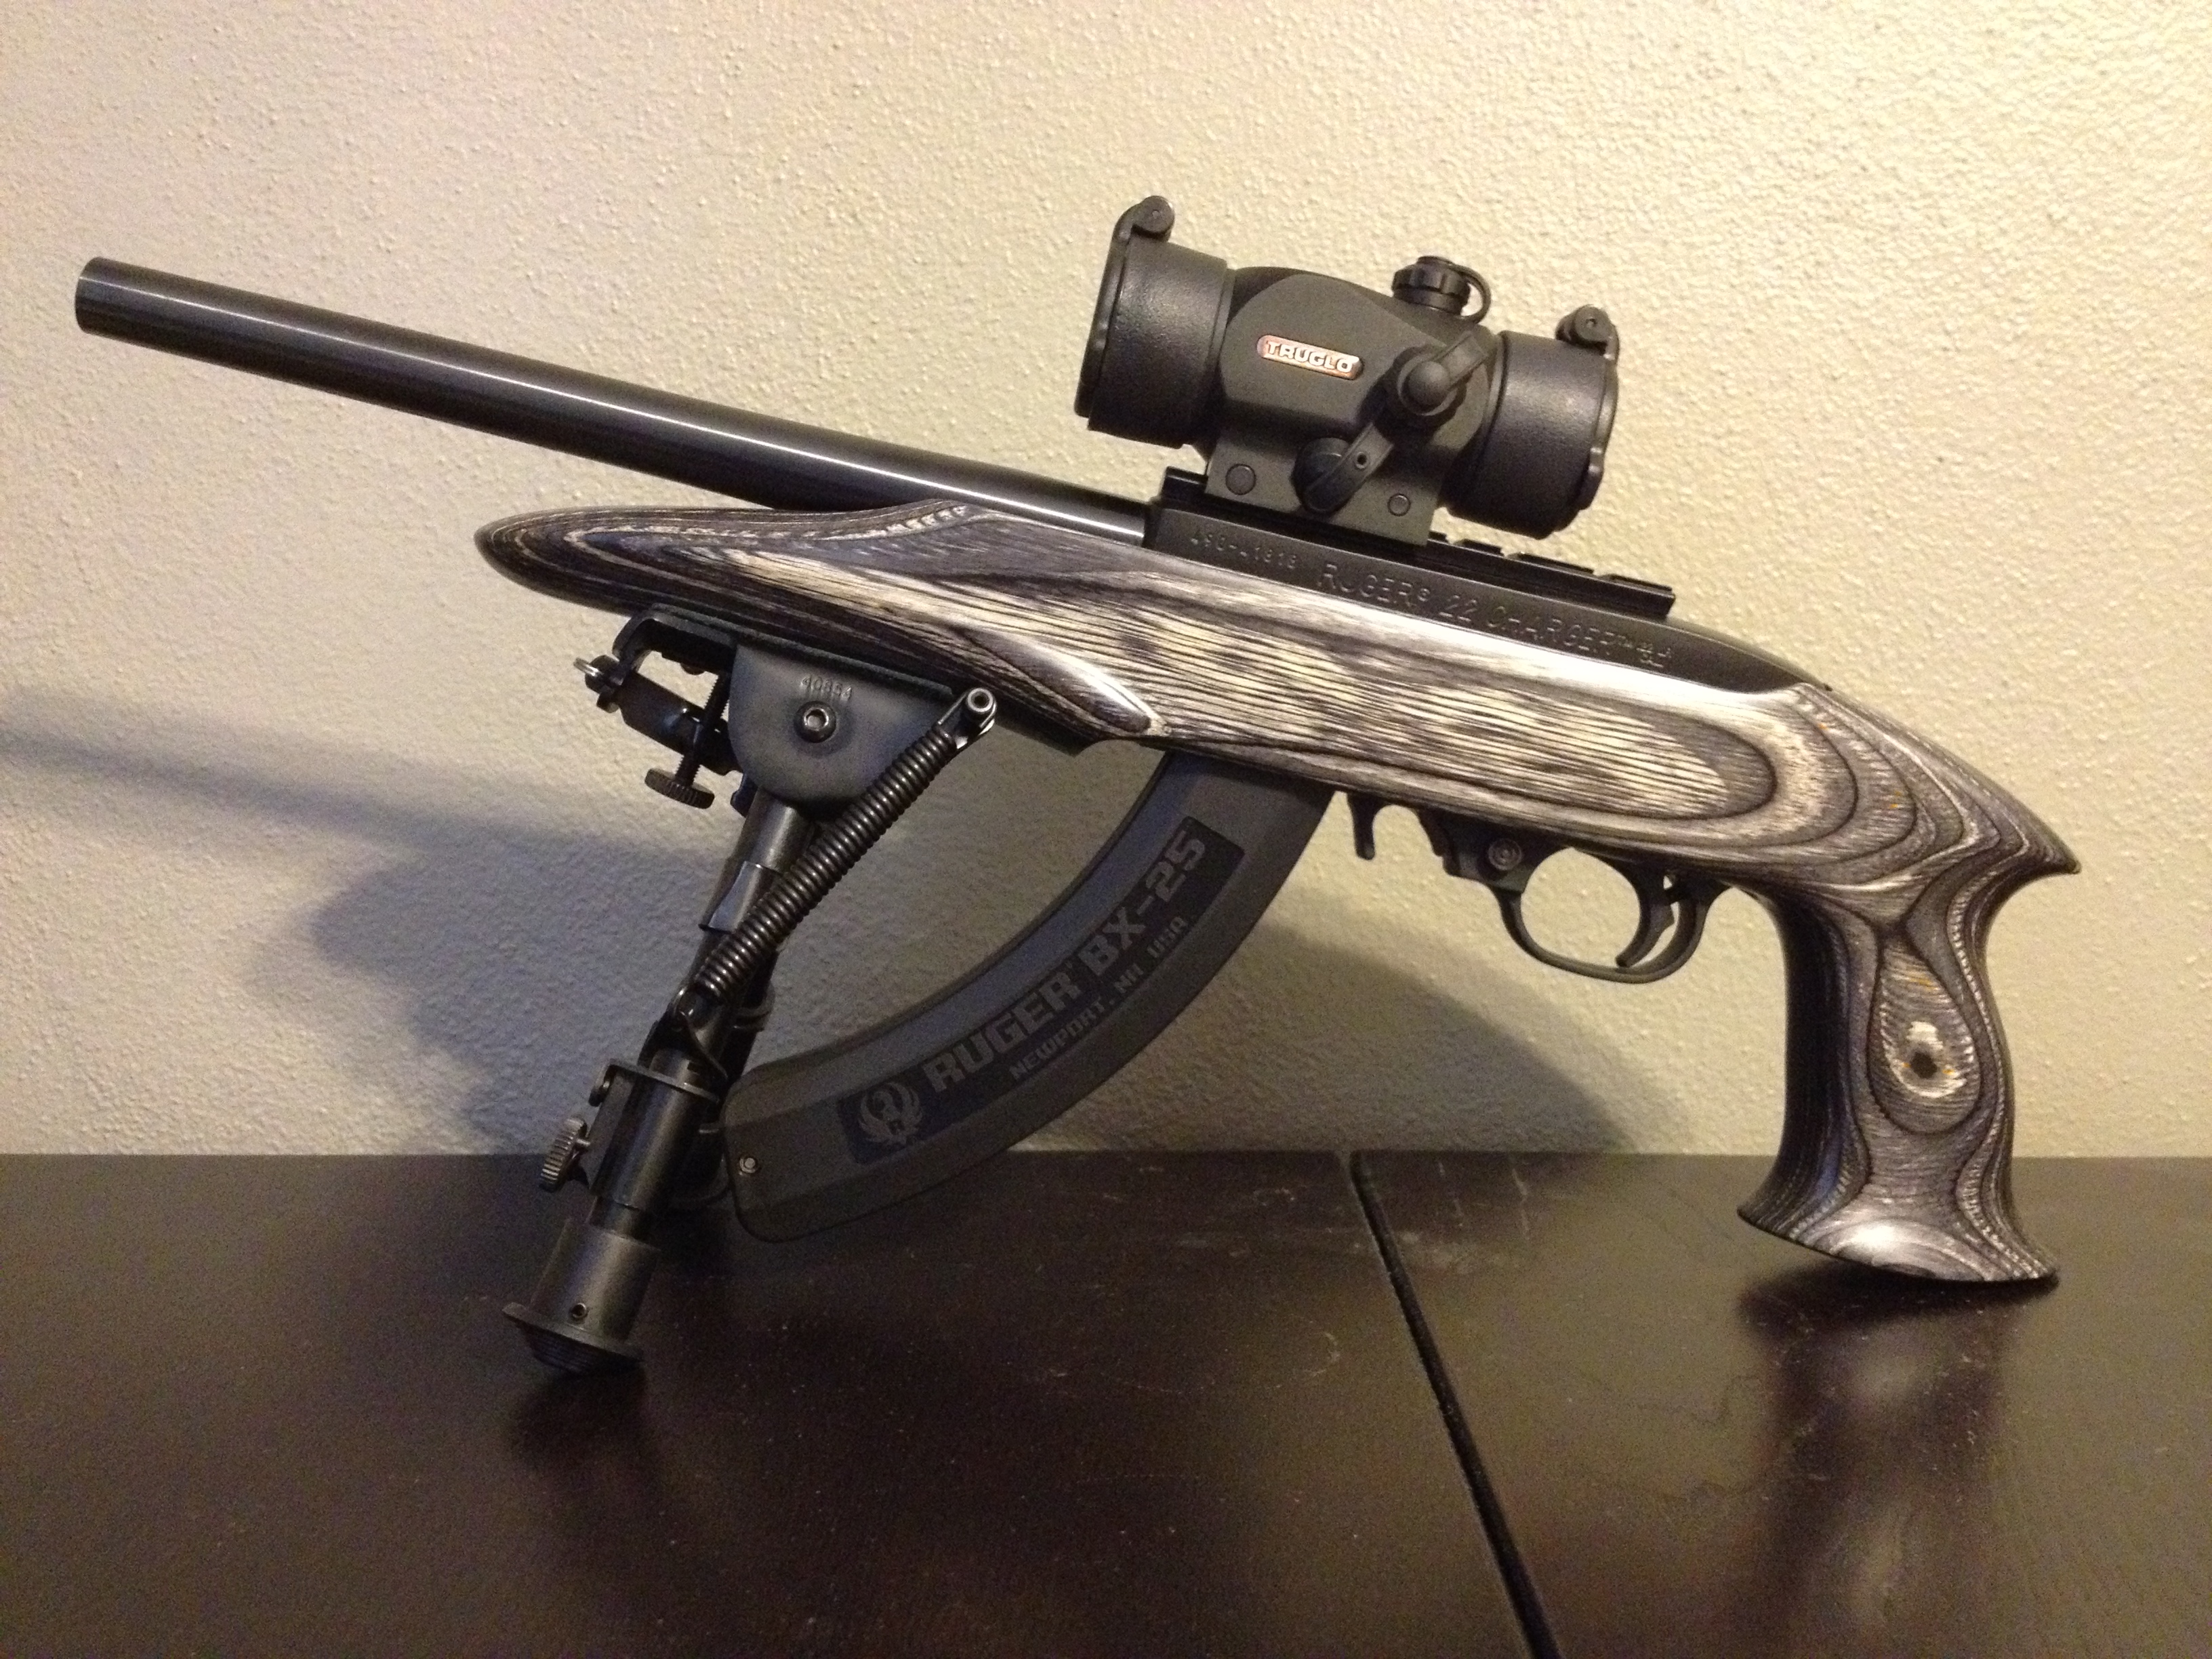 Amazing Ruger 10 22 Rifle Pictures & Backgrounds